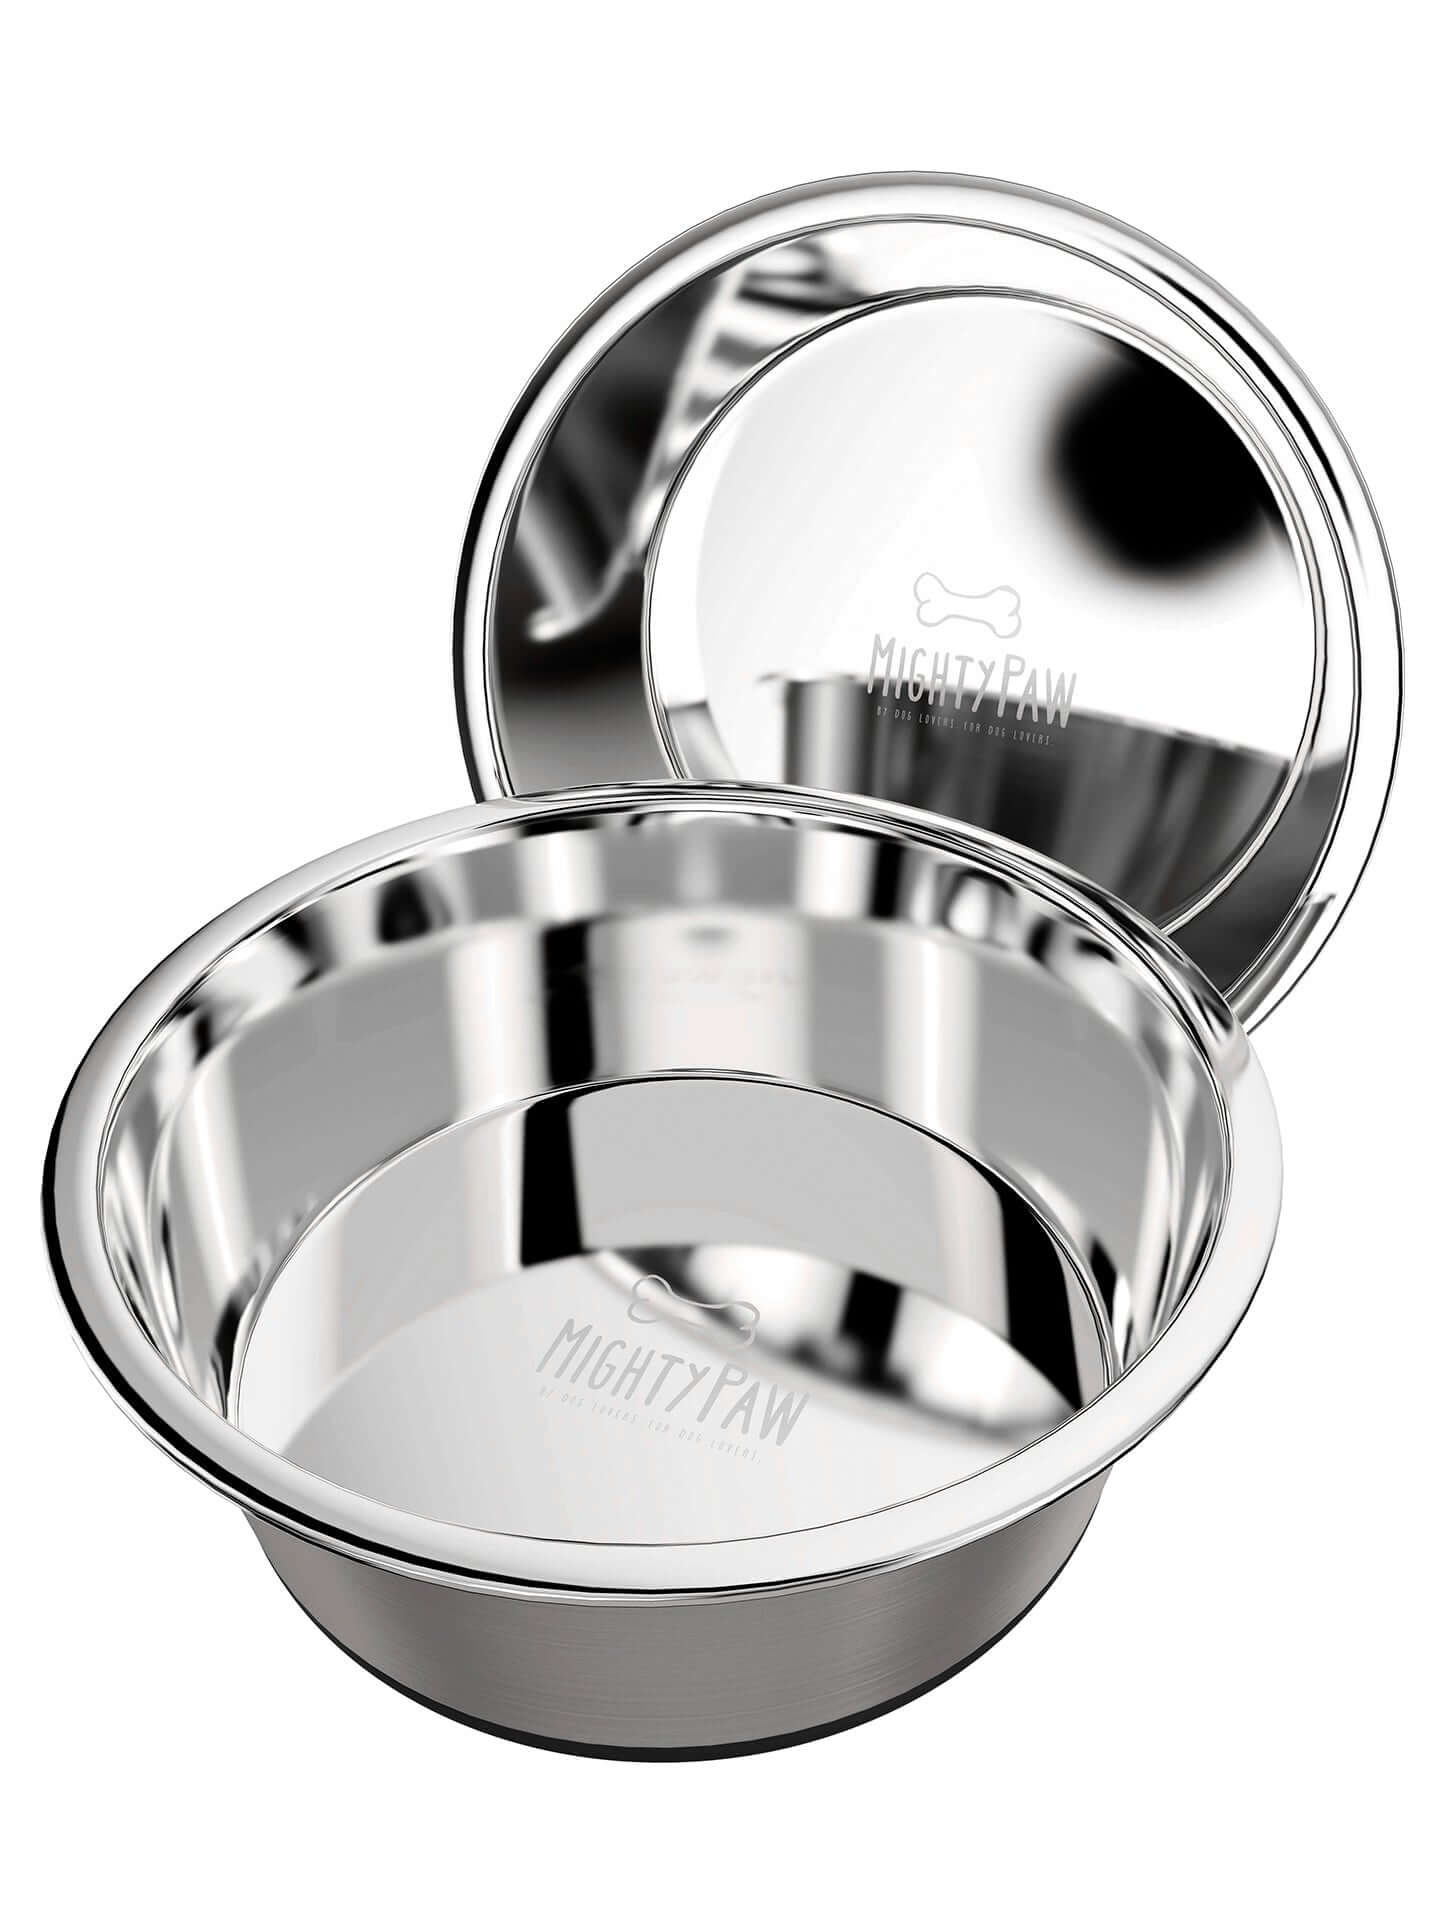 Mighty Paw Stainless Steel Dog Bowl, 2 Count, 2 Cup